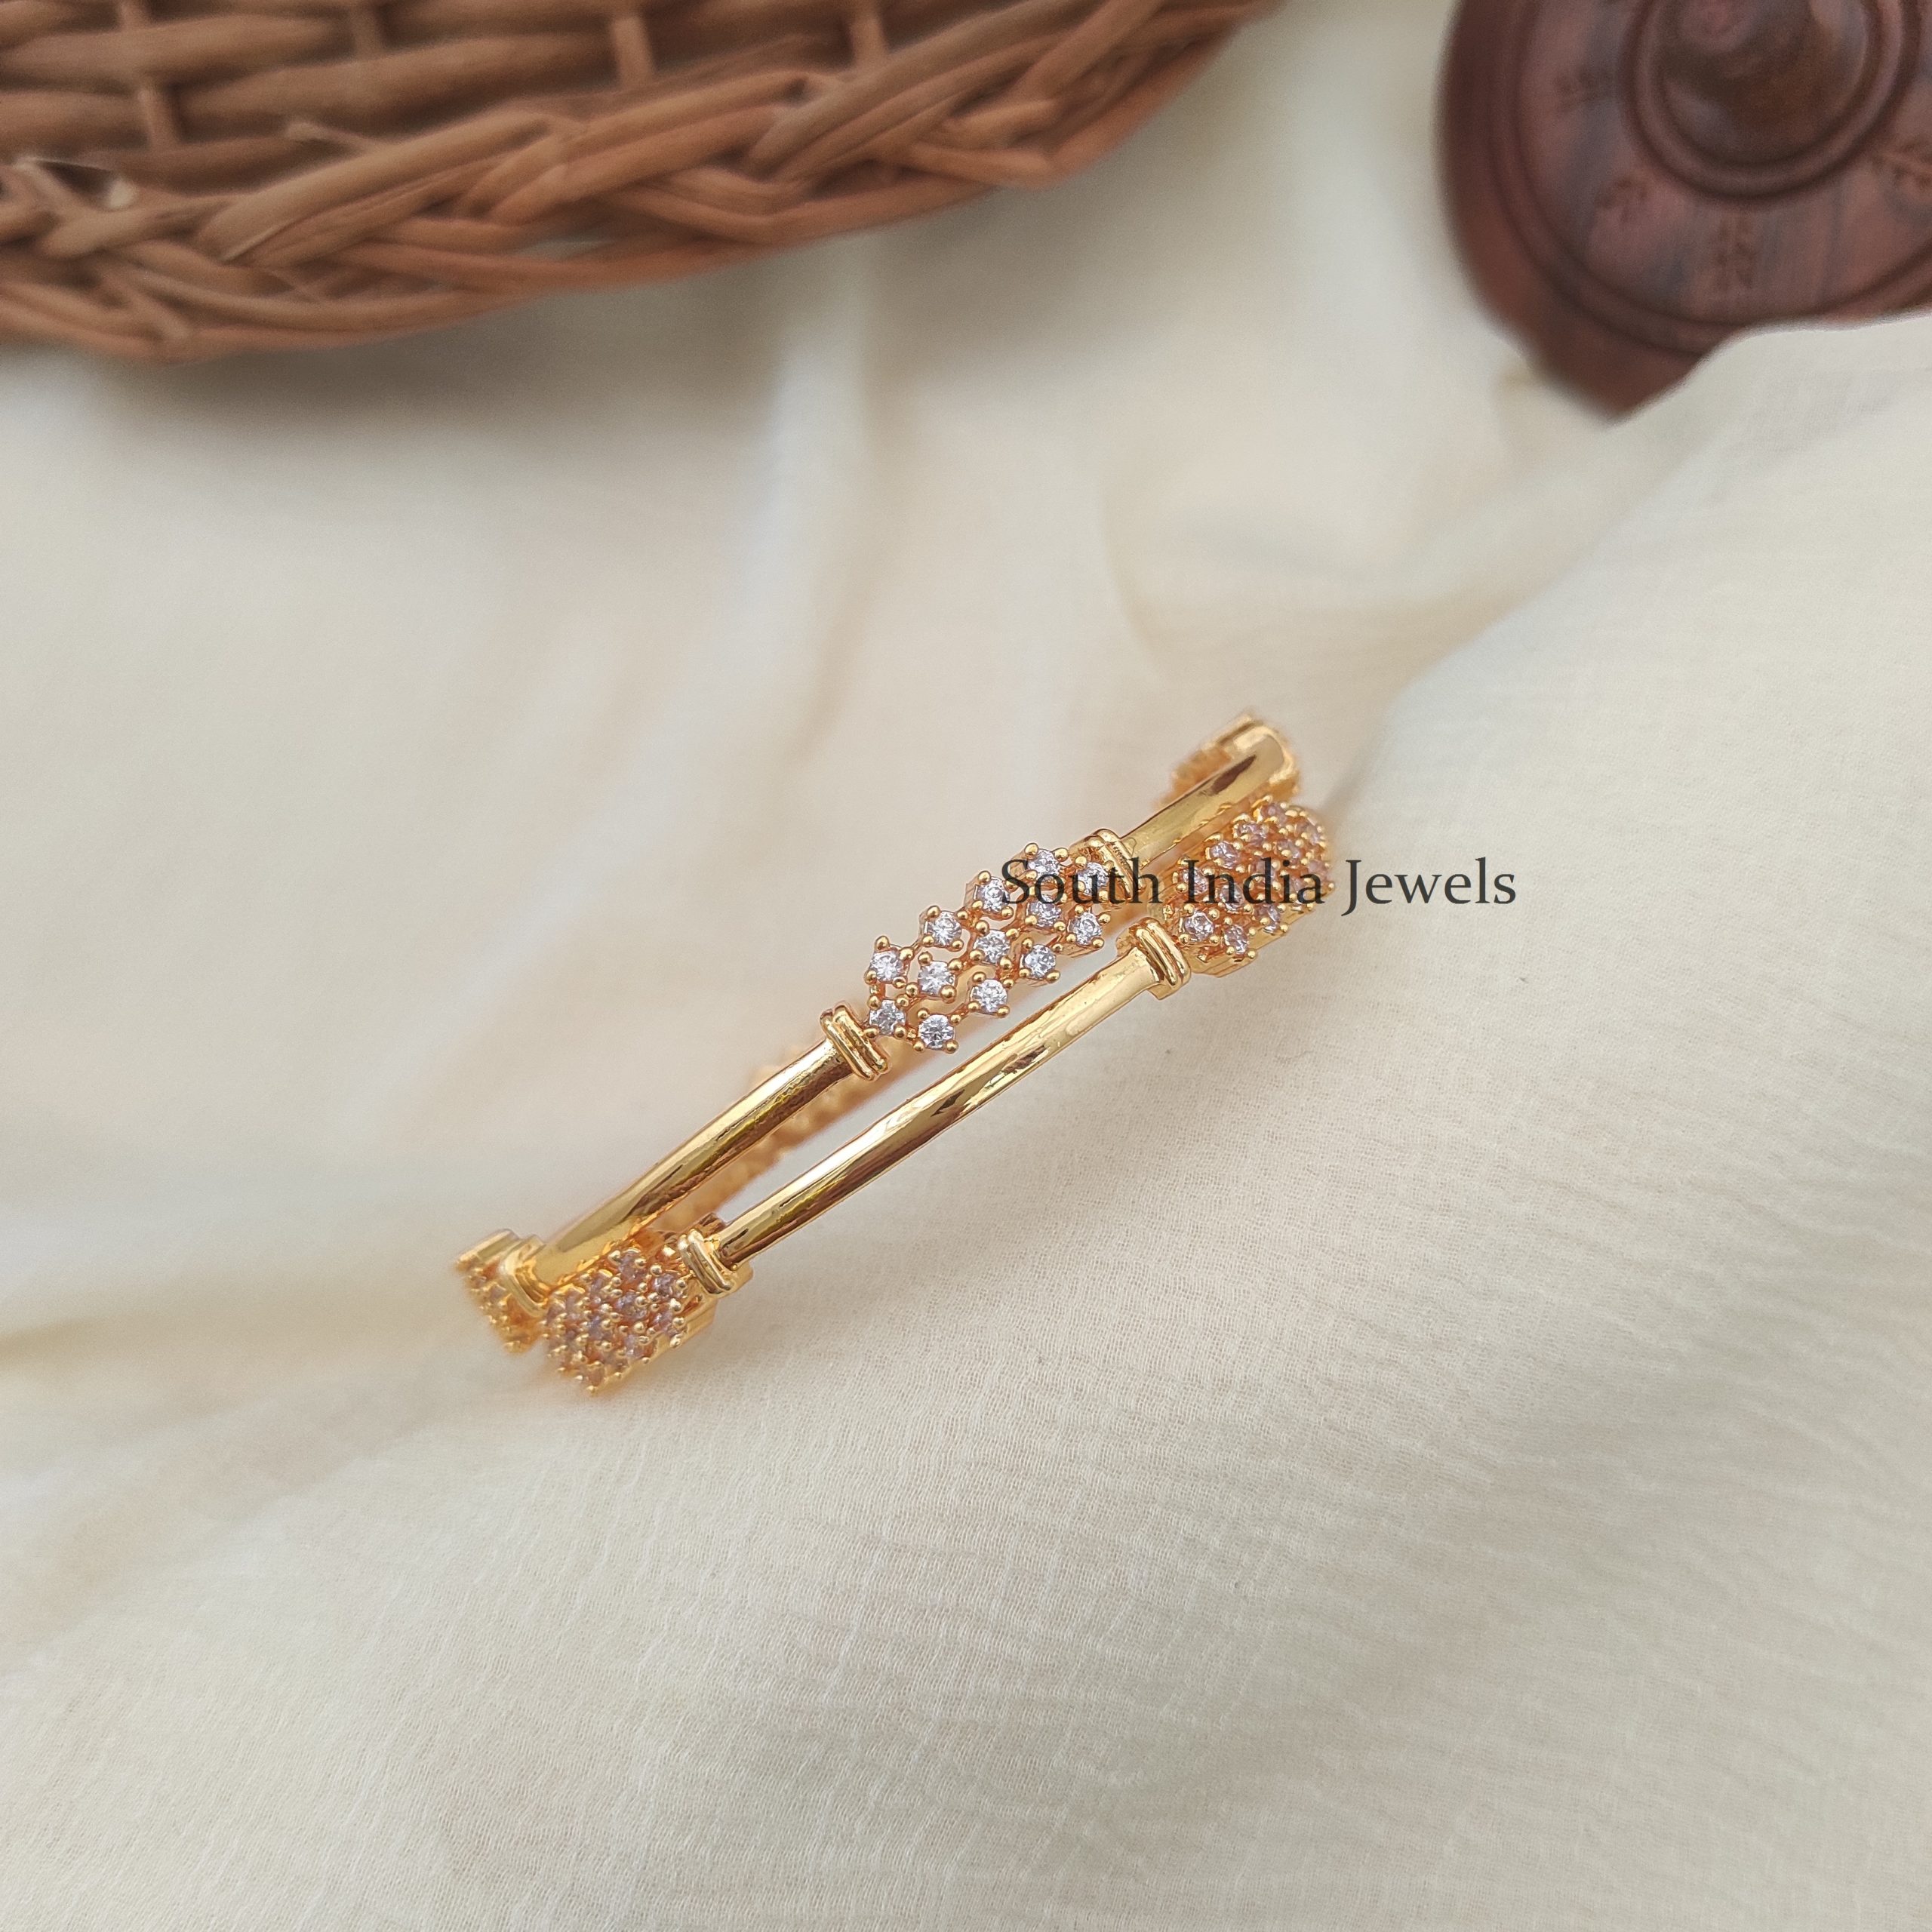 Buy Bangles Online | Premium Quality - South India Jewels